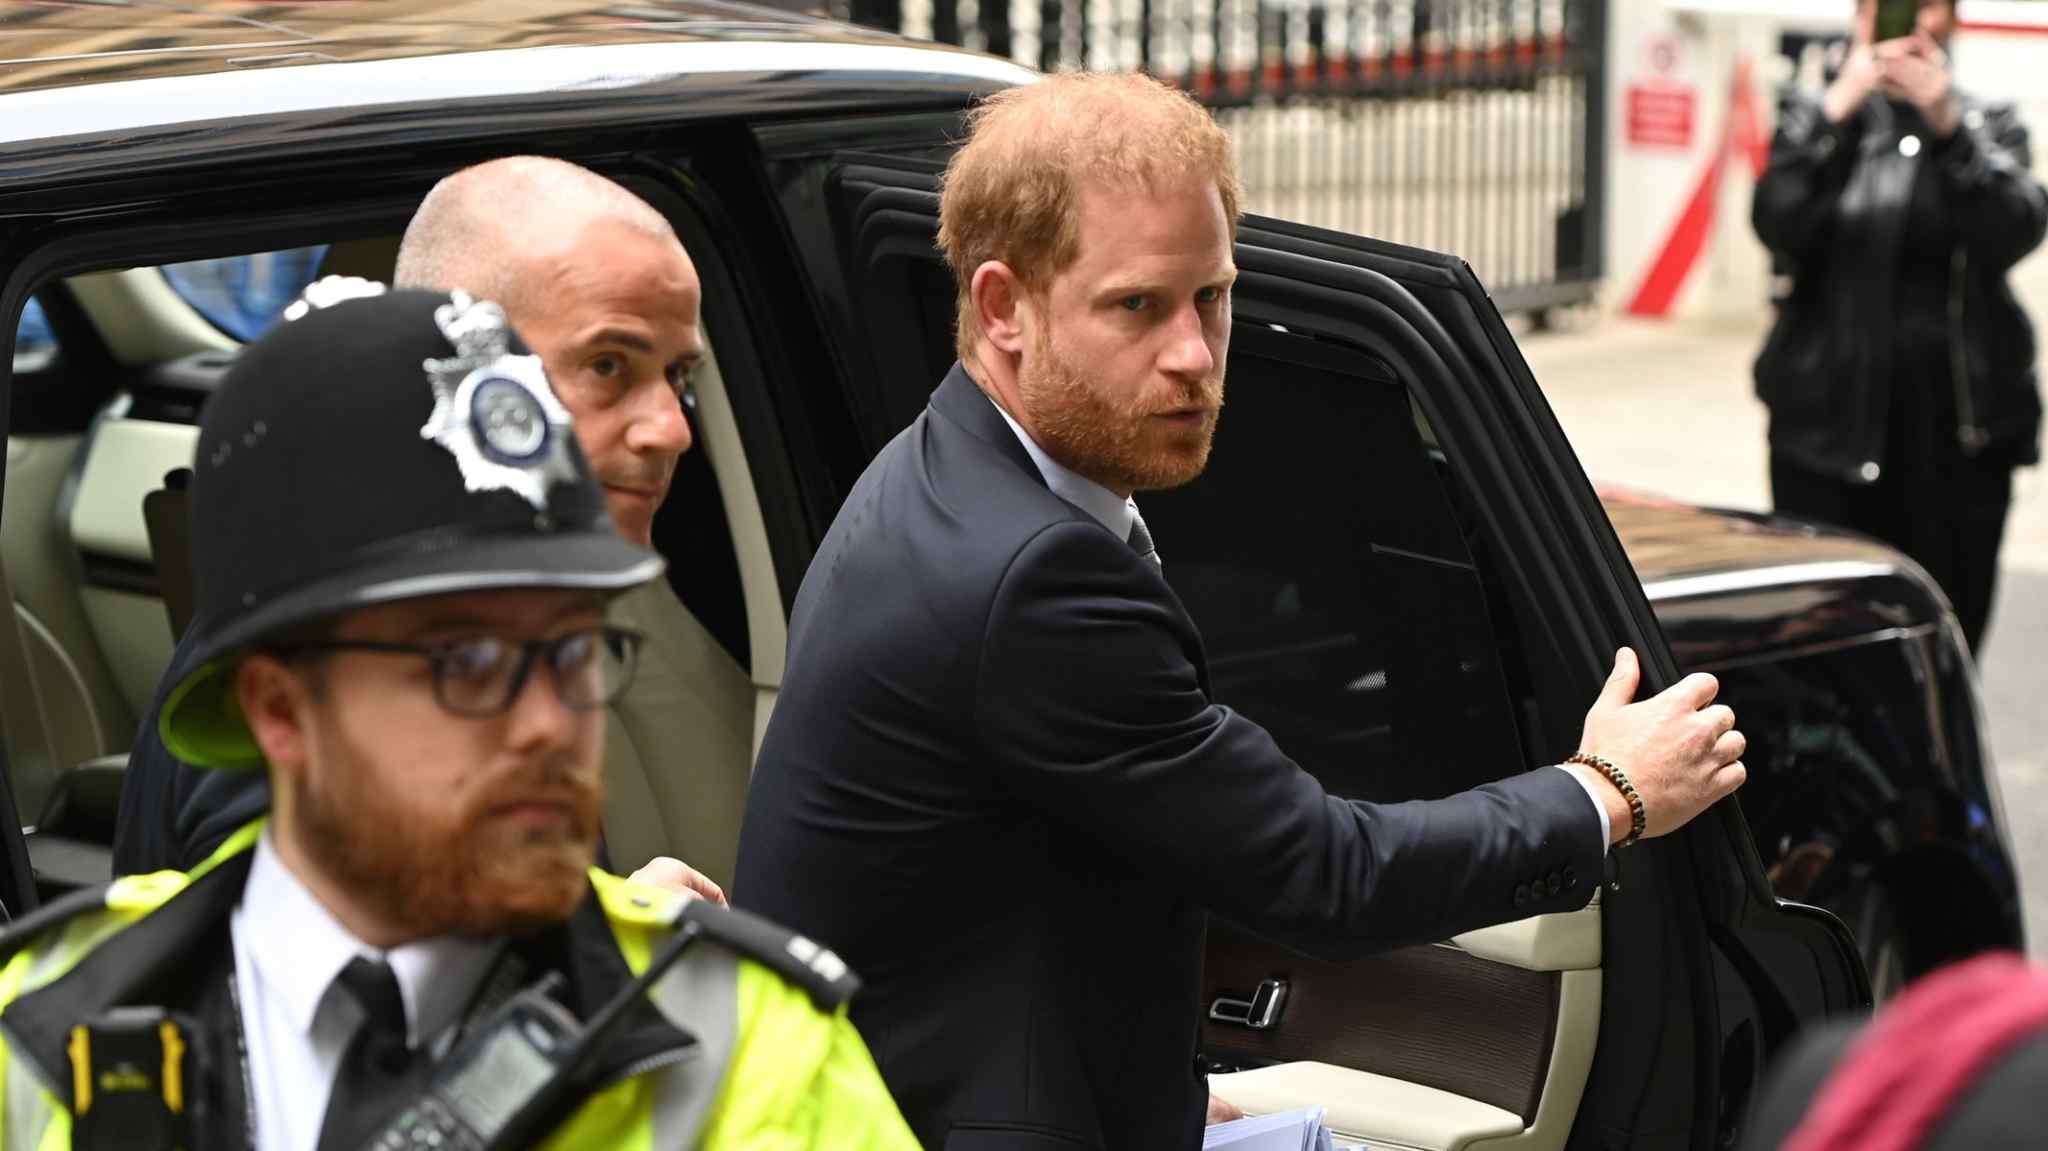 Prince Harry attacks Mirror Group for ‘industrial-scale destruction of evidence’